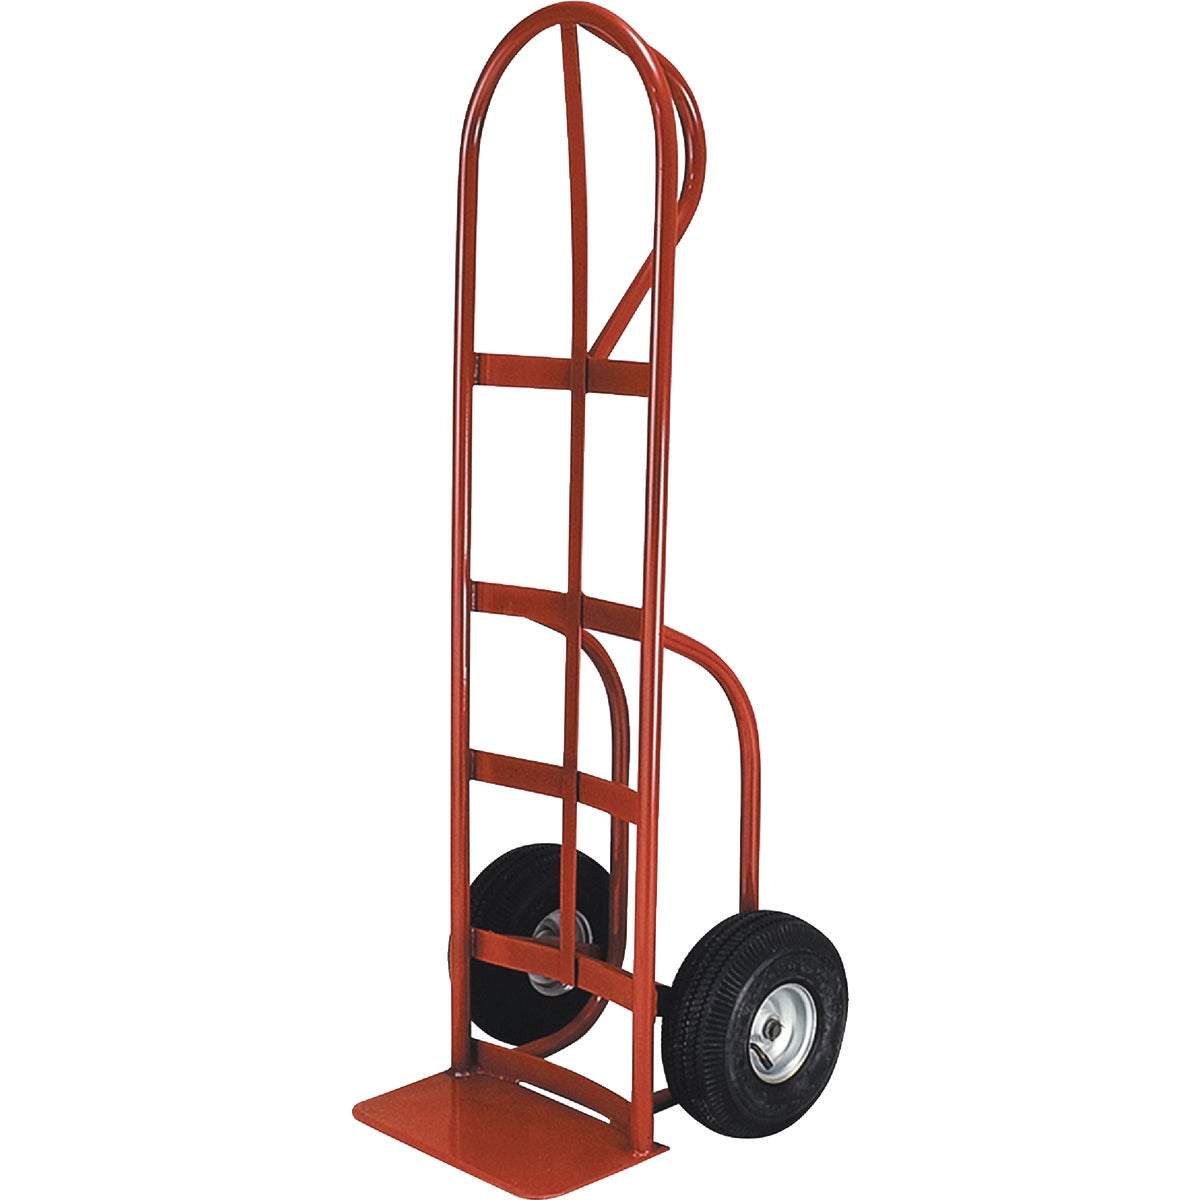 Item 722016, Hand truck featuring steel frame construction. 800 Lb. load capacity.